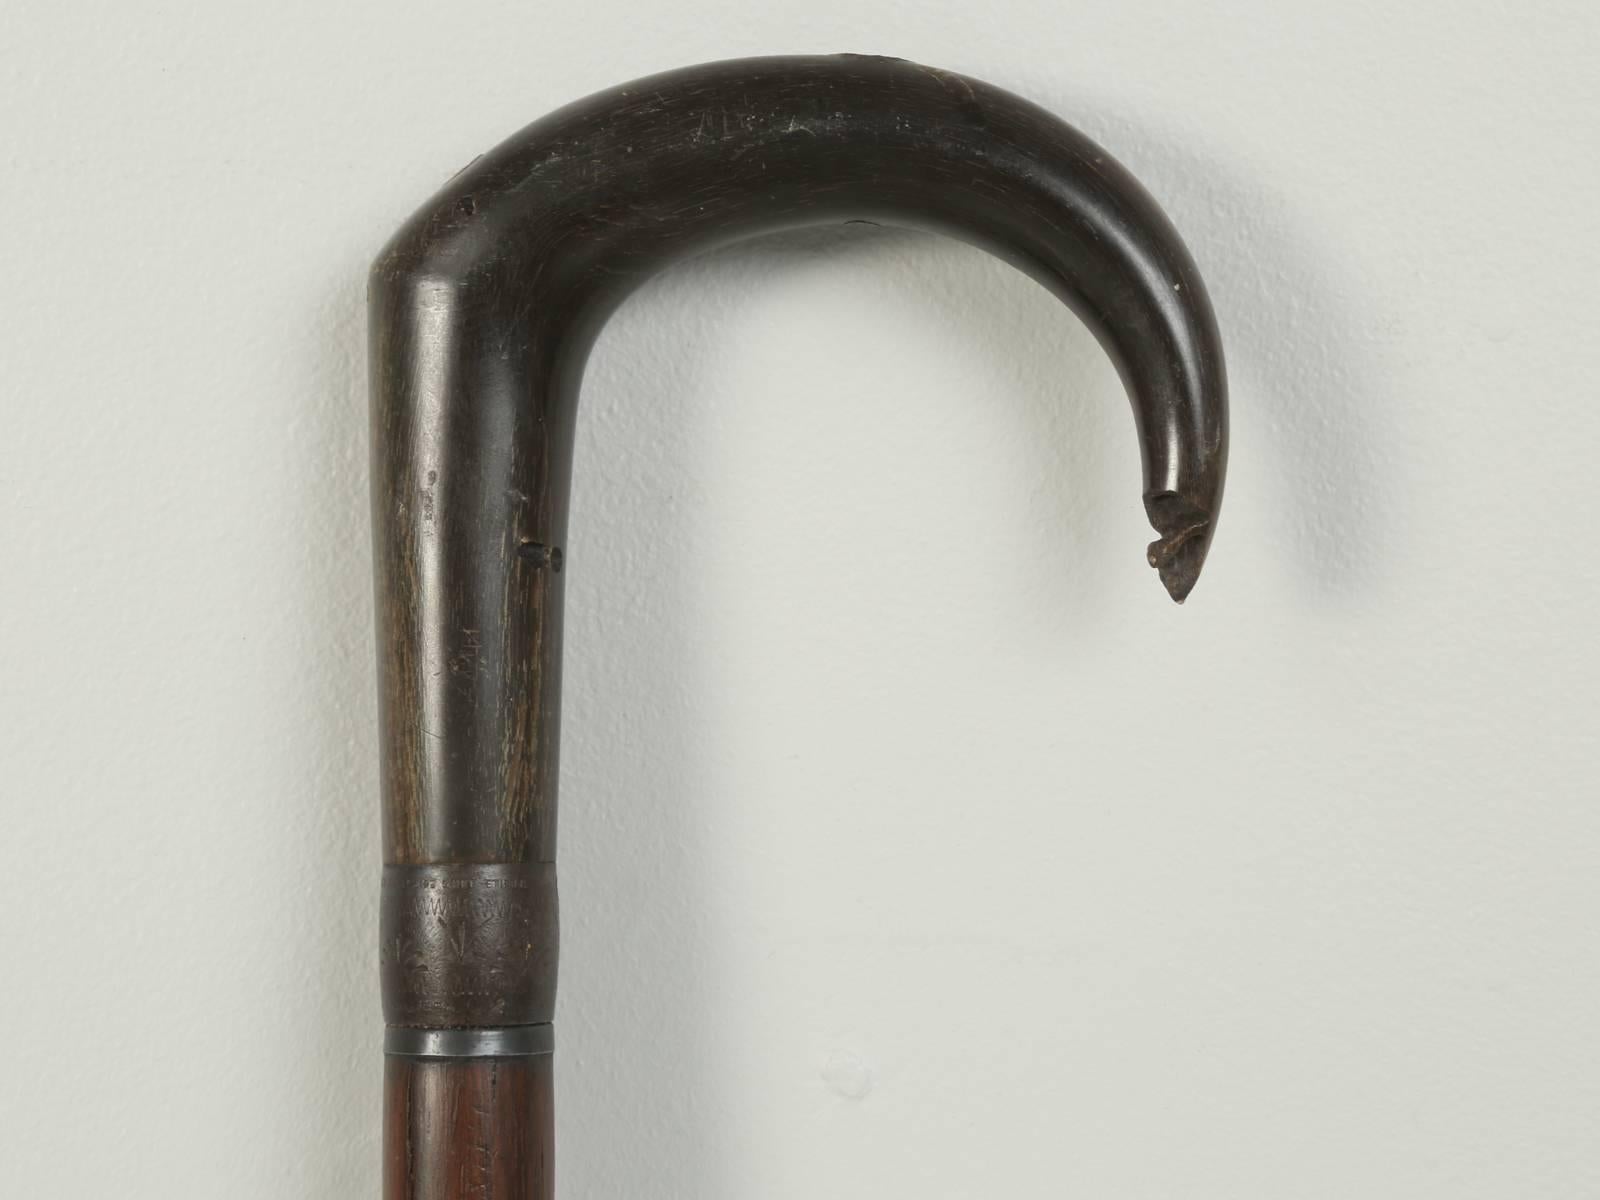 English Antique French Horn Handle Walking Stick, or Cane That Was Once a Gun